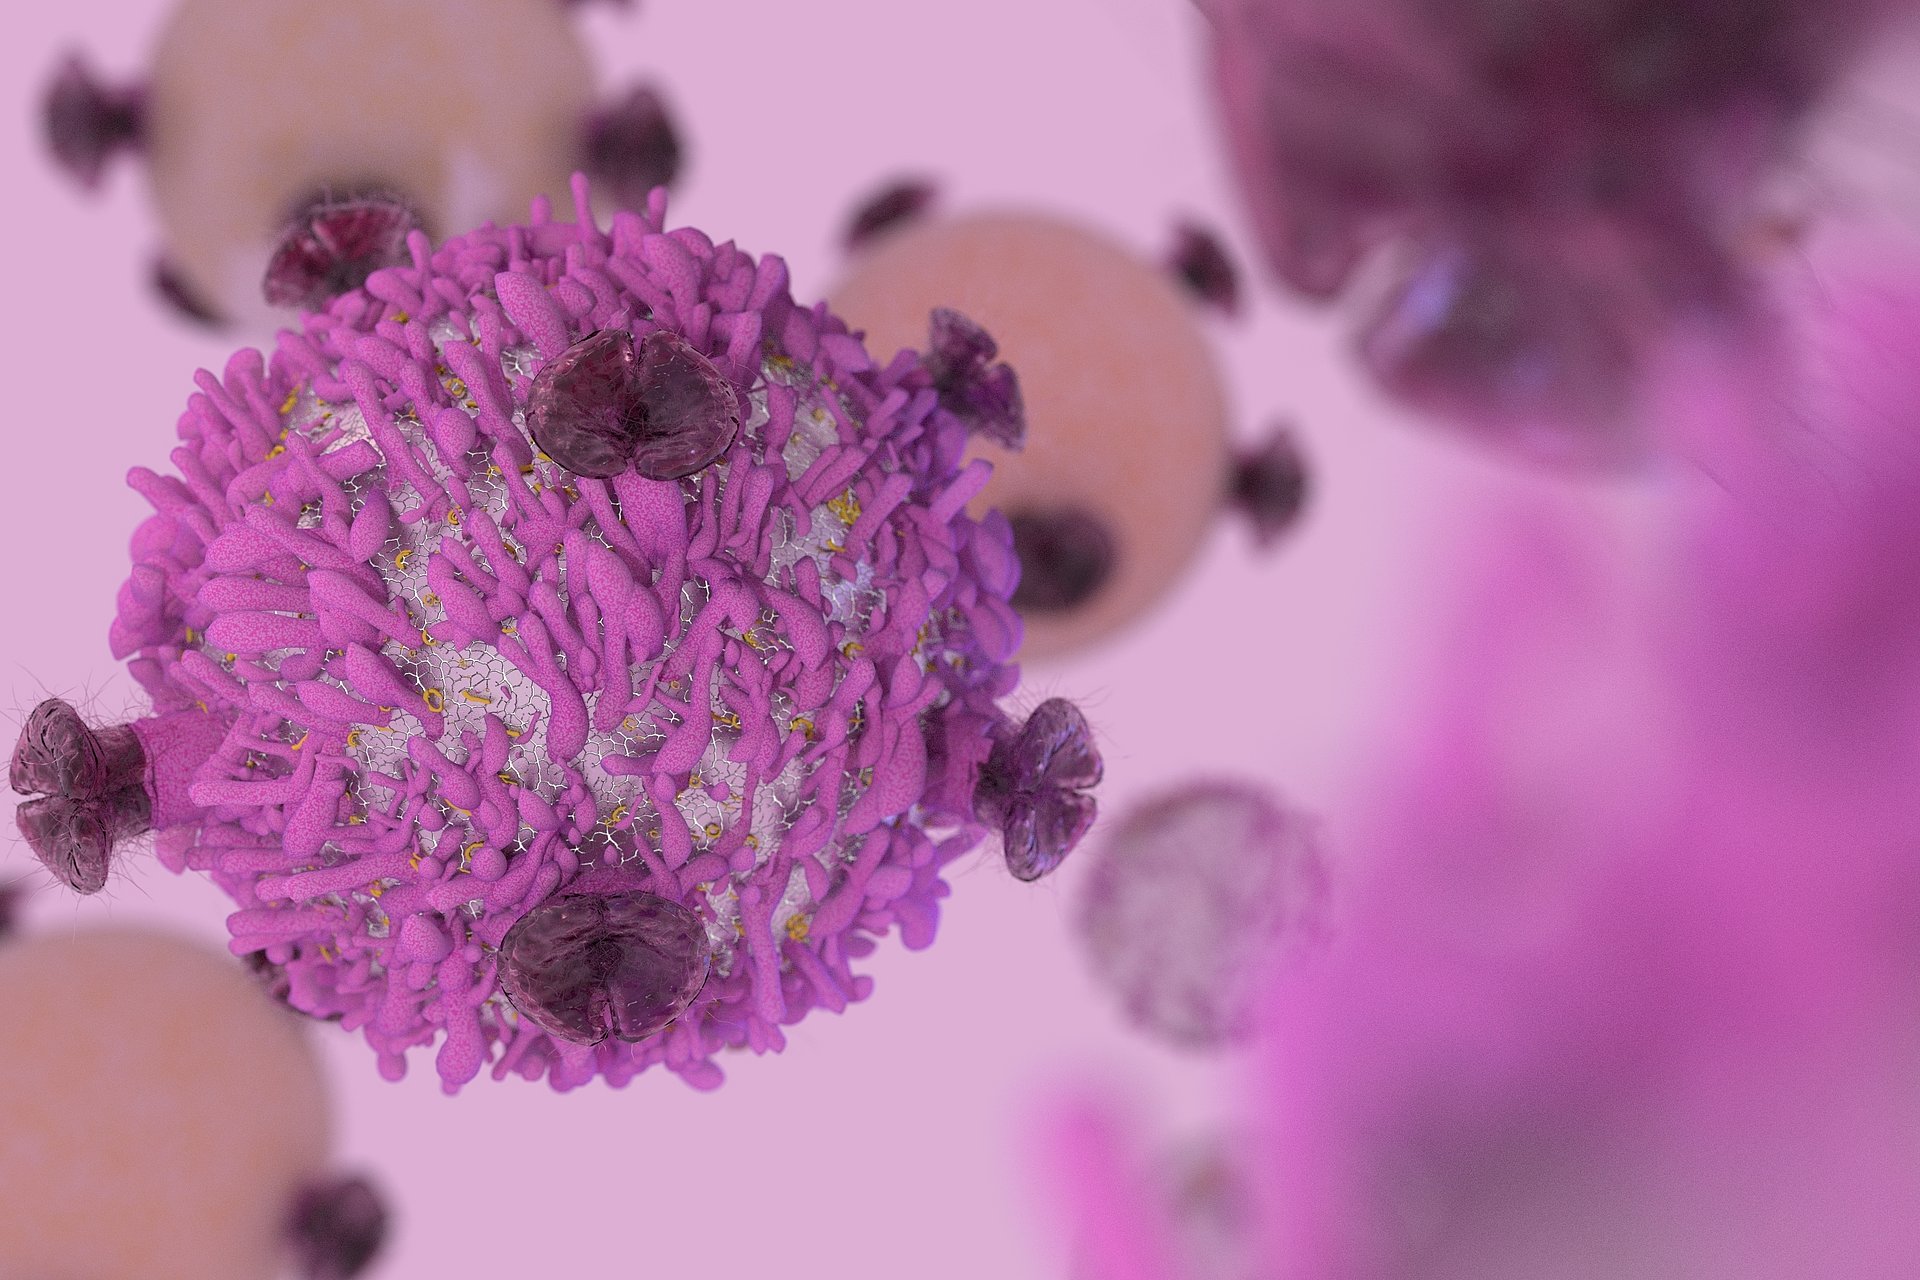 T-cell lymphocytes with receptors for killing cancer cells in cancer immunotherapy.